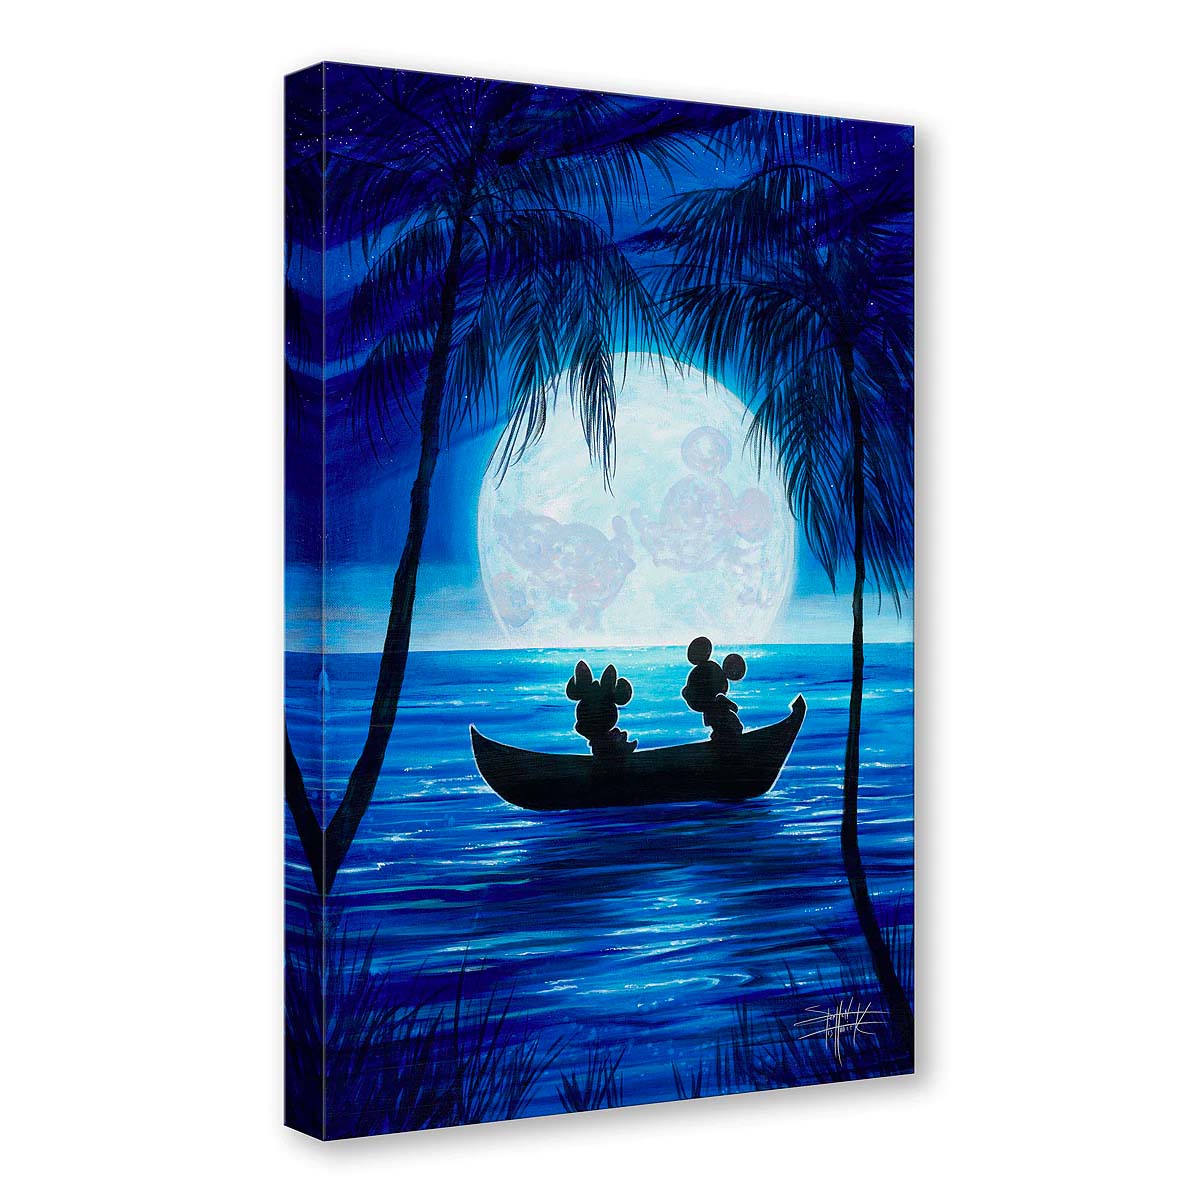 Stephen Fishwick Disney "Moonlight Moment" Limited Edition Canvas Giclee